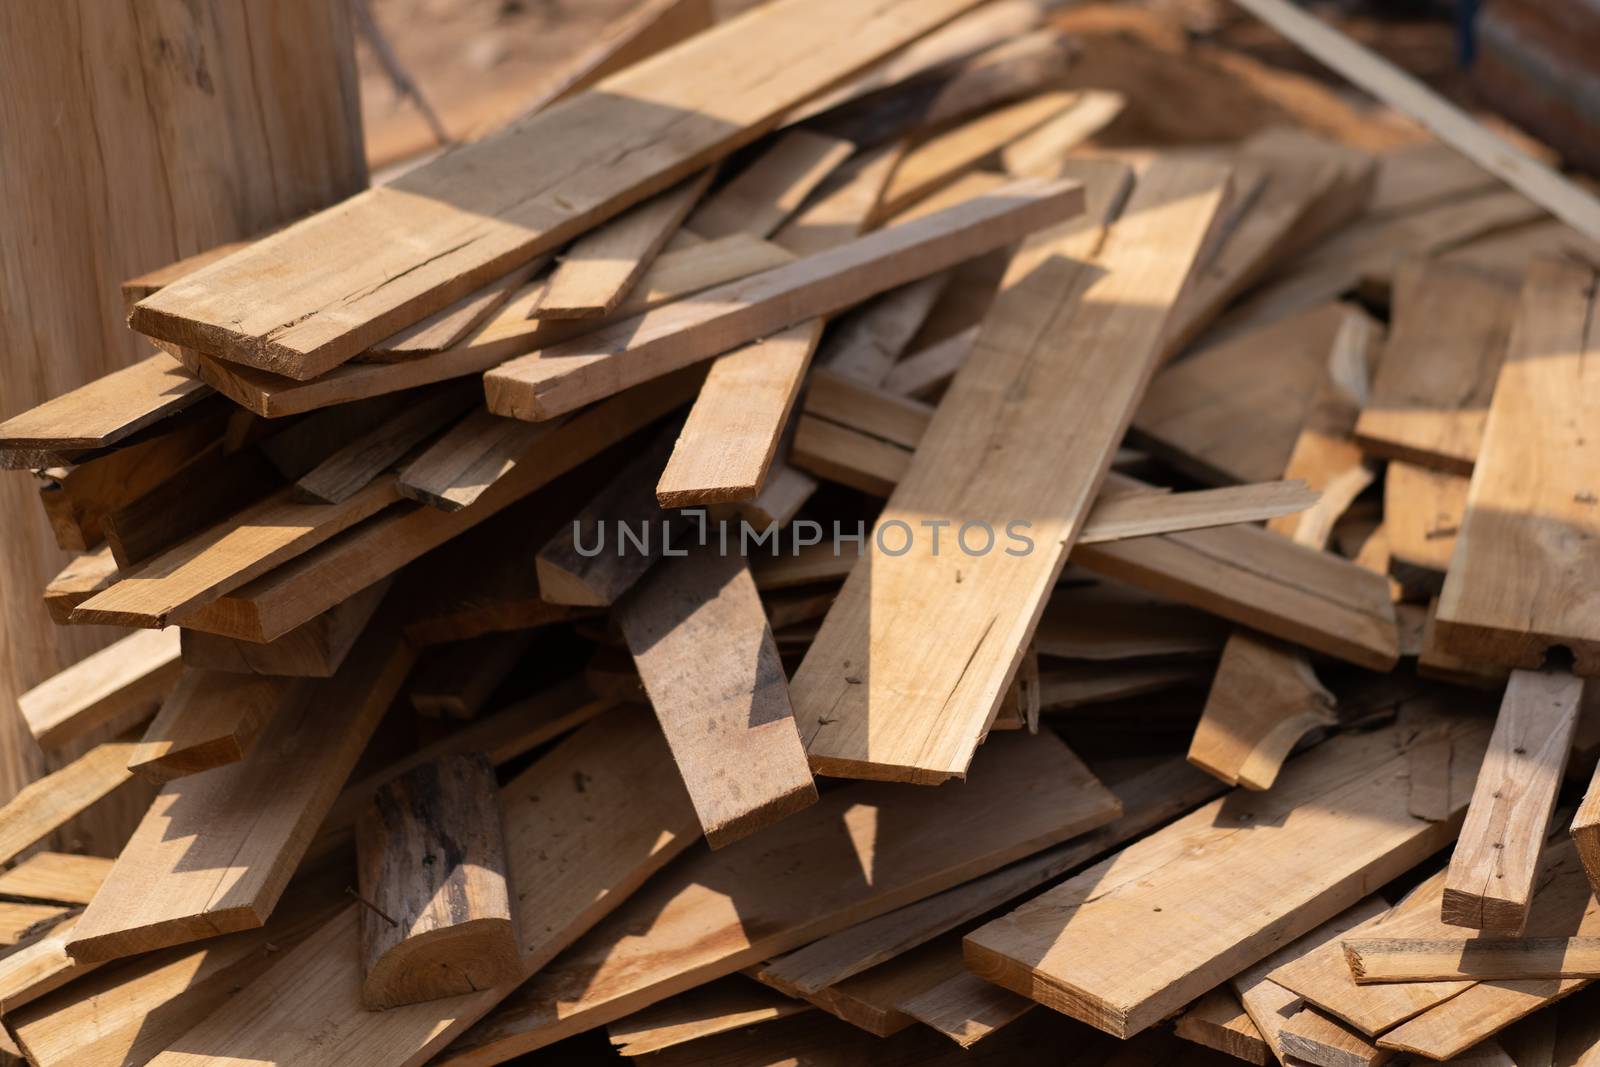 The wood was stacked on the floor. by JCStock